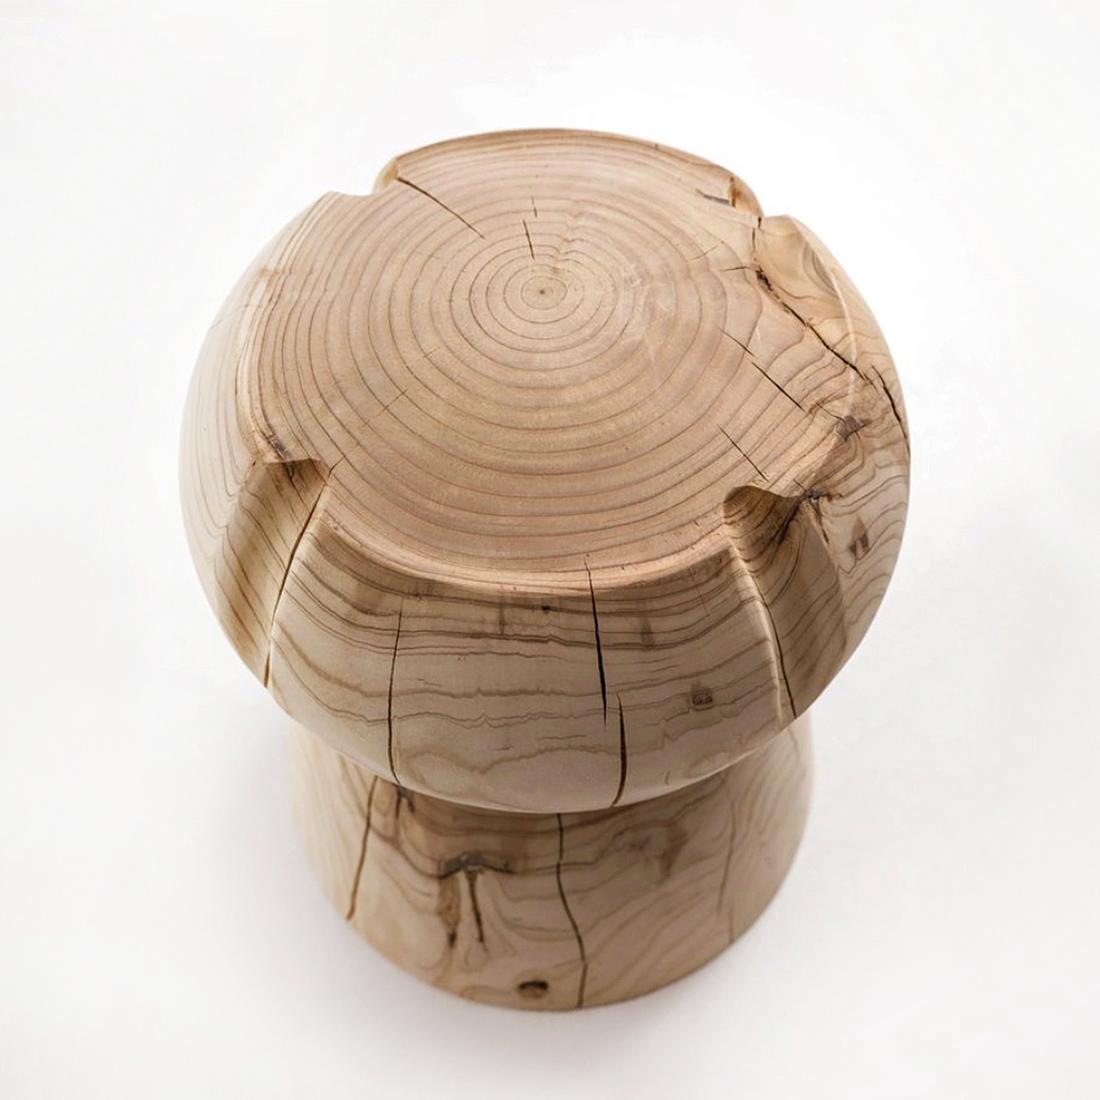 Stool cork in solid natural aromatic cedar wood.
Made in one block of cedar wood. Treated with
natural pine extracts.
Solid cedar wood include movement, 
cracks and changes in wood conditions, 
this is the essential characteristic of natural 
solid